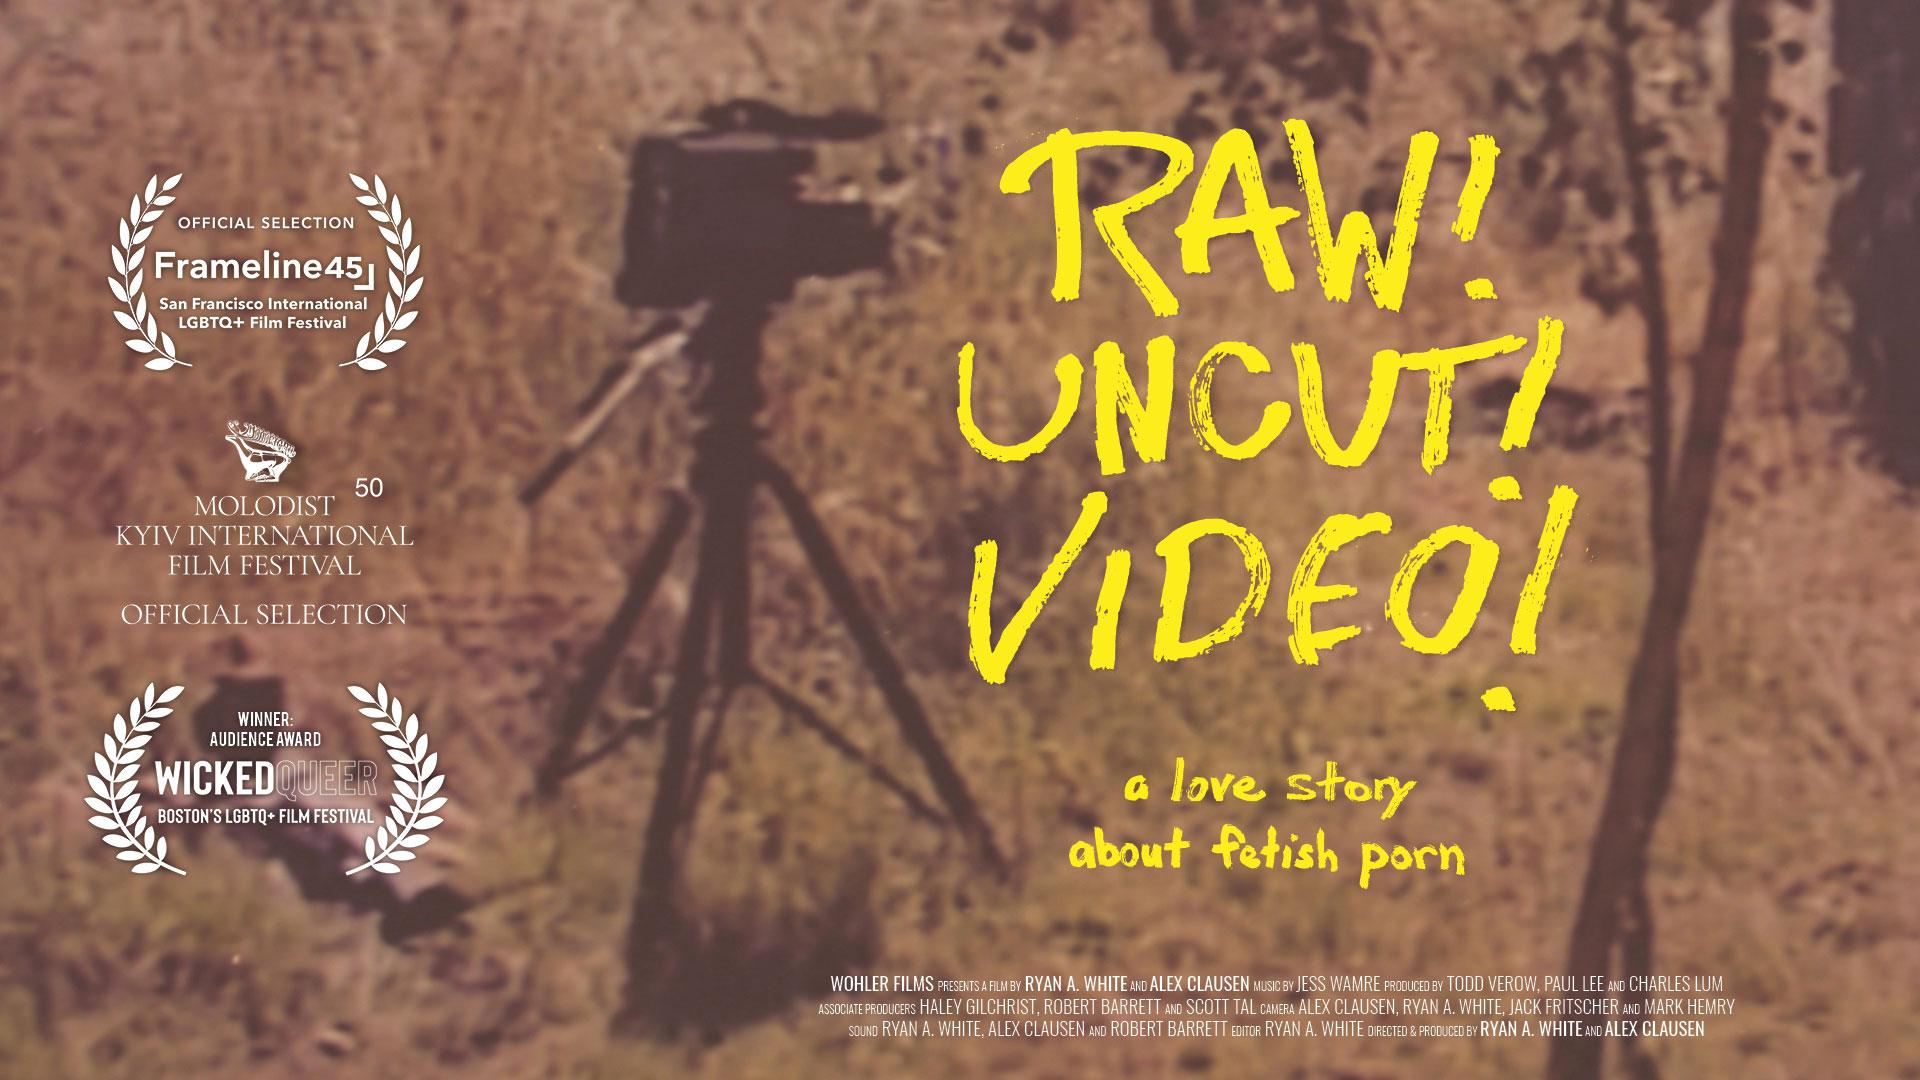 beautifull johnson recommends raw uncut music videos pic